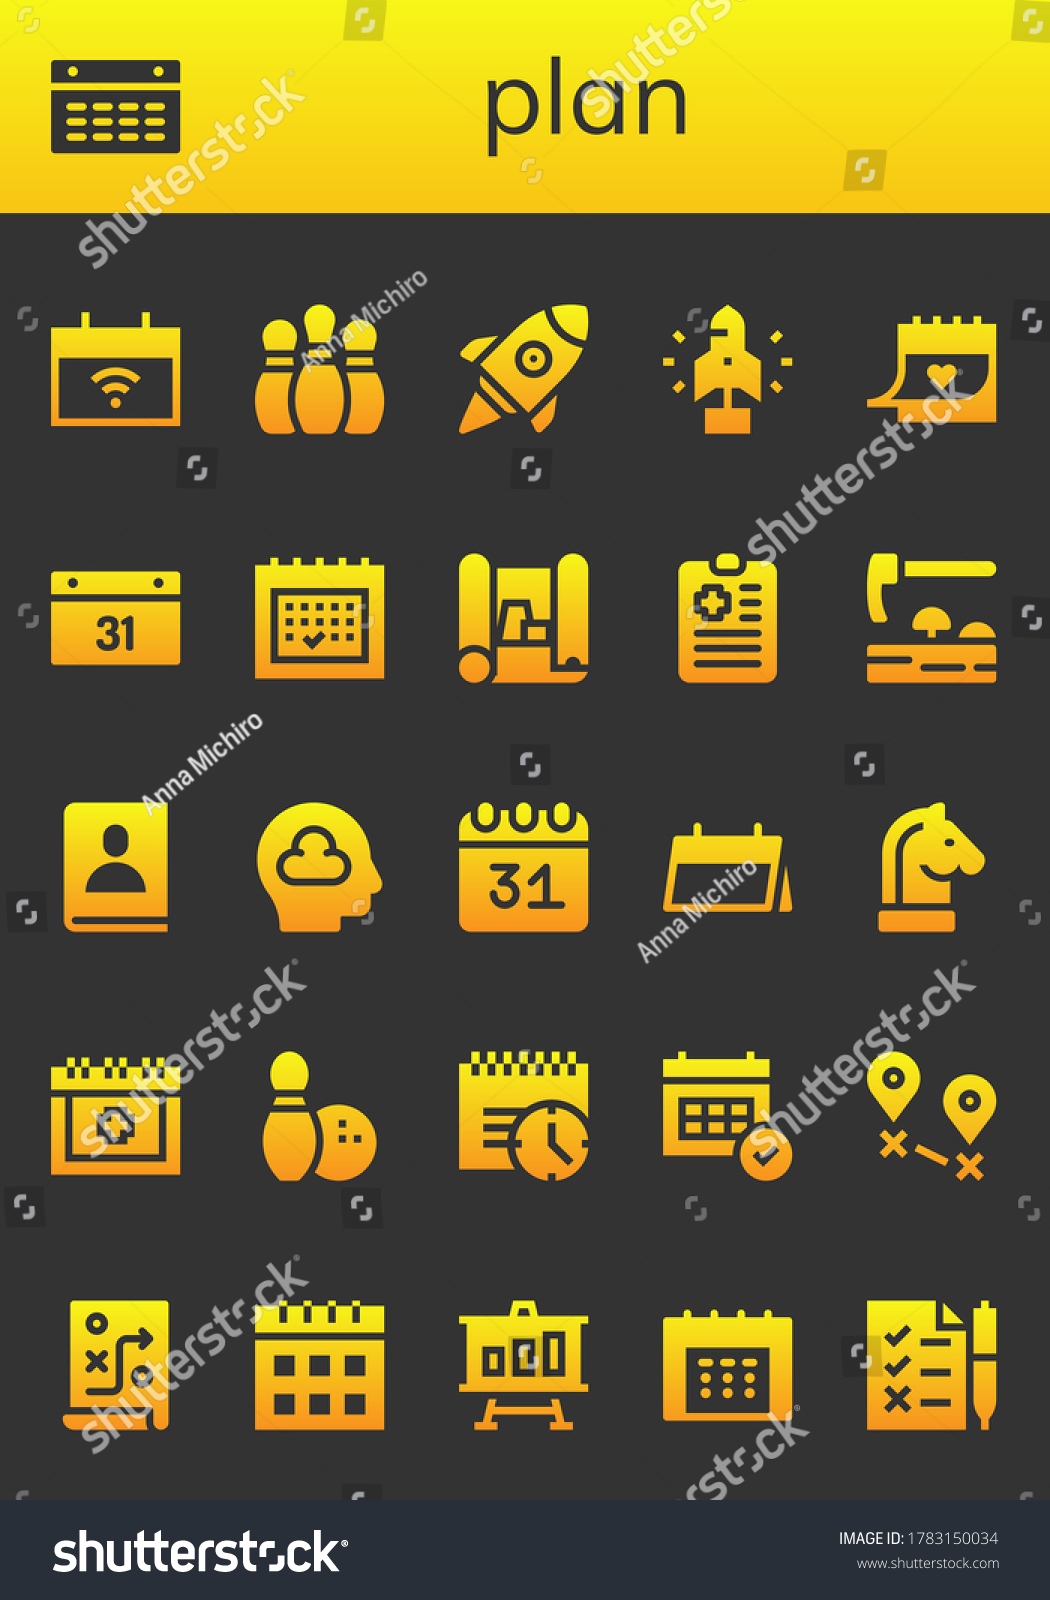 SVG of Modern Simple Set of plan Vector filled Icons. Contains such as Calendar, Bowling pins, Startup, Scheme, Clipboard, Adze, Agenda and more Fully Editable and Pixel Perfect icons. svg